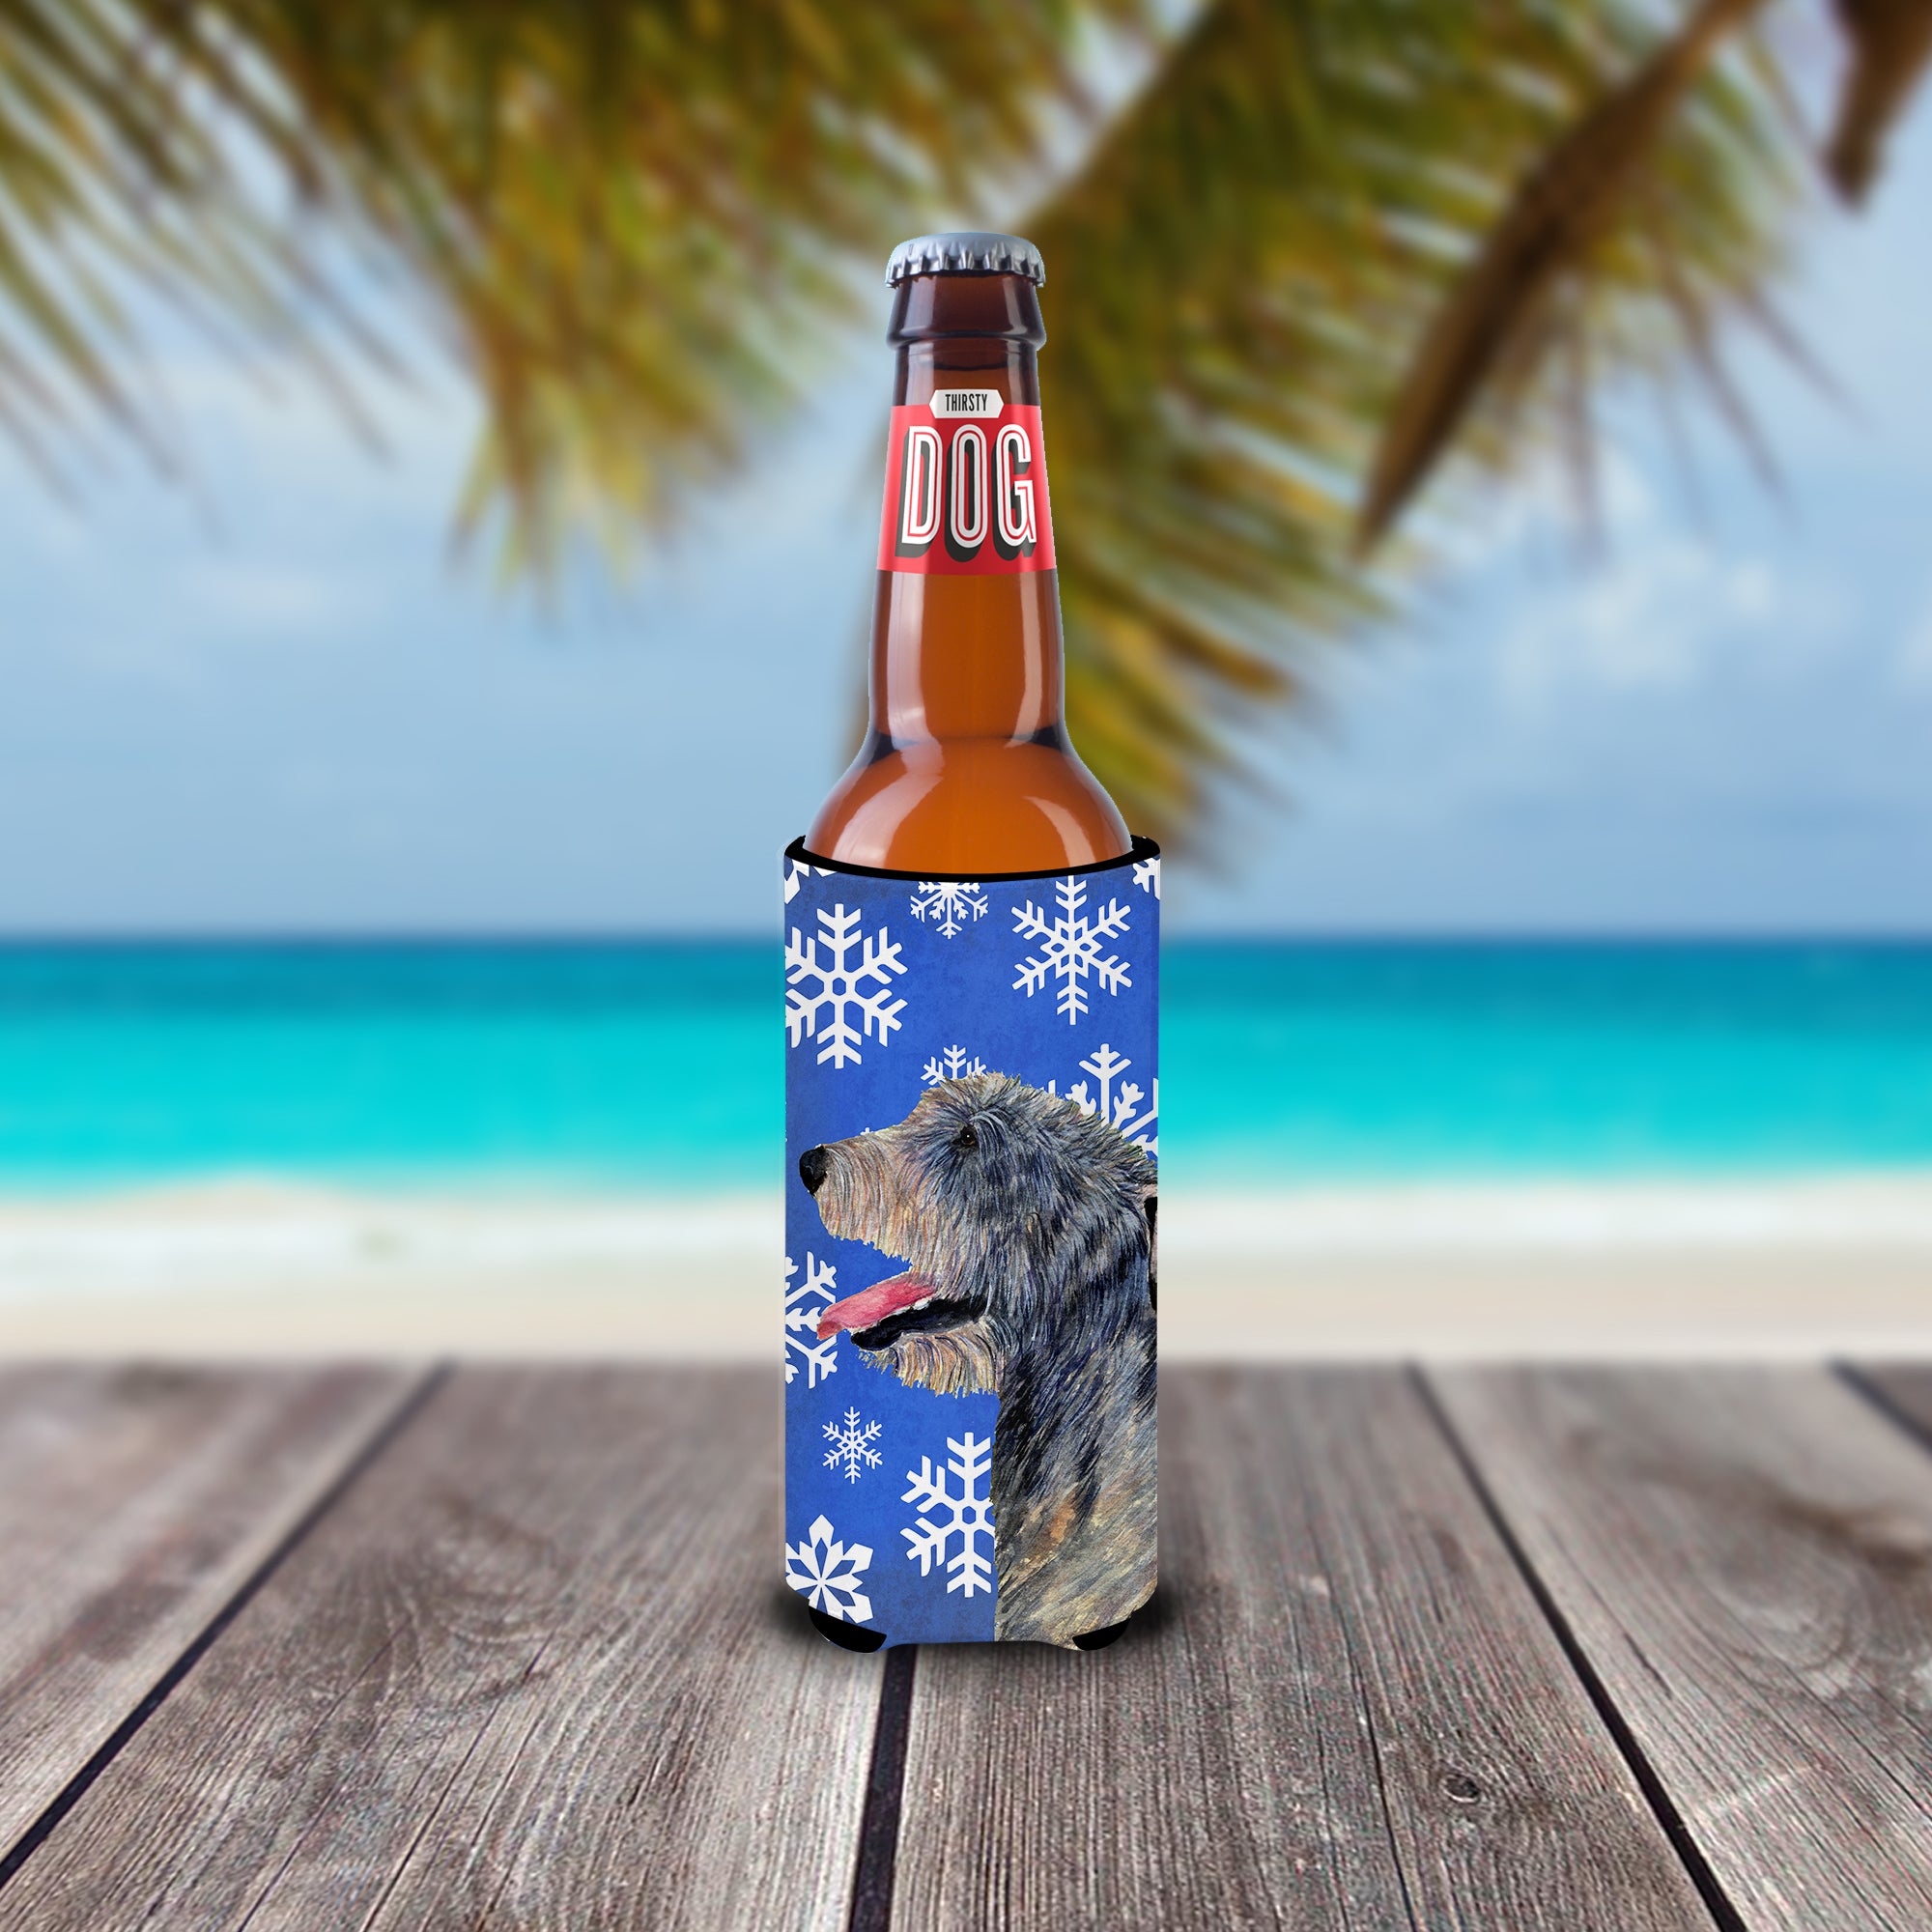 Irish Wolfhound Winter Snowflakes Holiday Ultra Beverage Insulators for slim cans SS4644MUK.